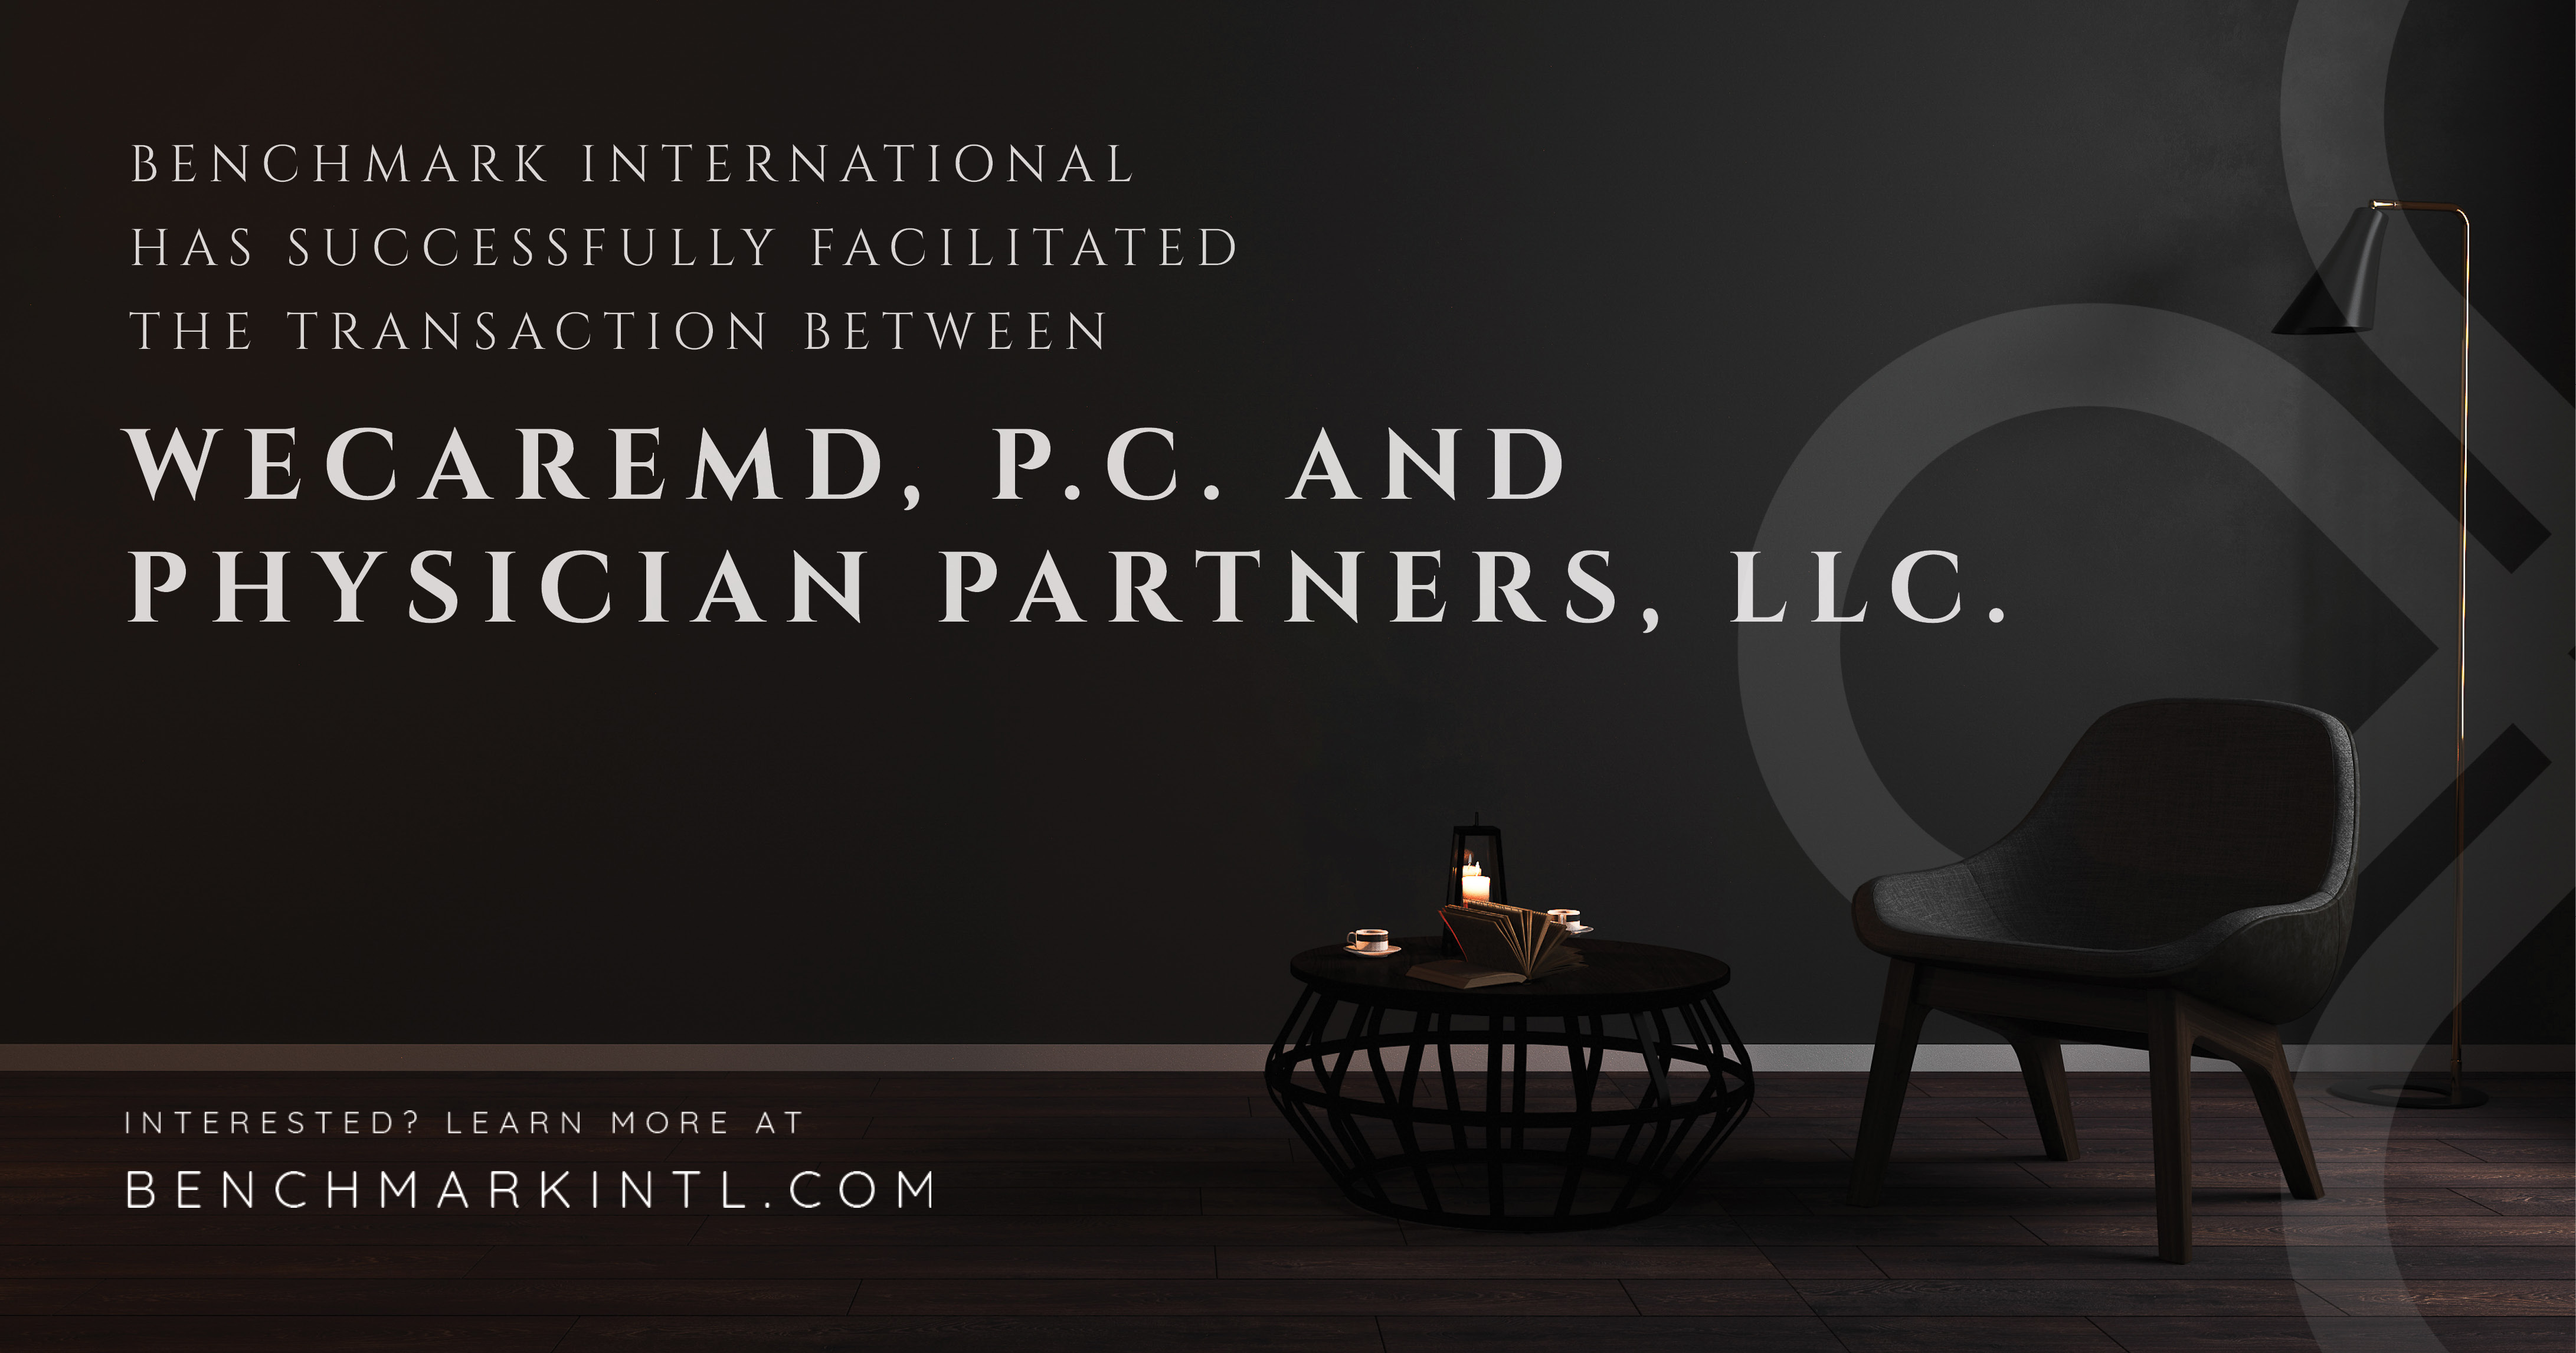 Benchmark International Successfully Facilitated The Transaction Between WeCareMD, P.C. And Physician Partners, LLC.